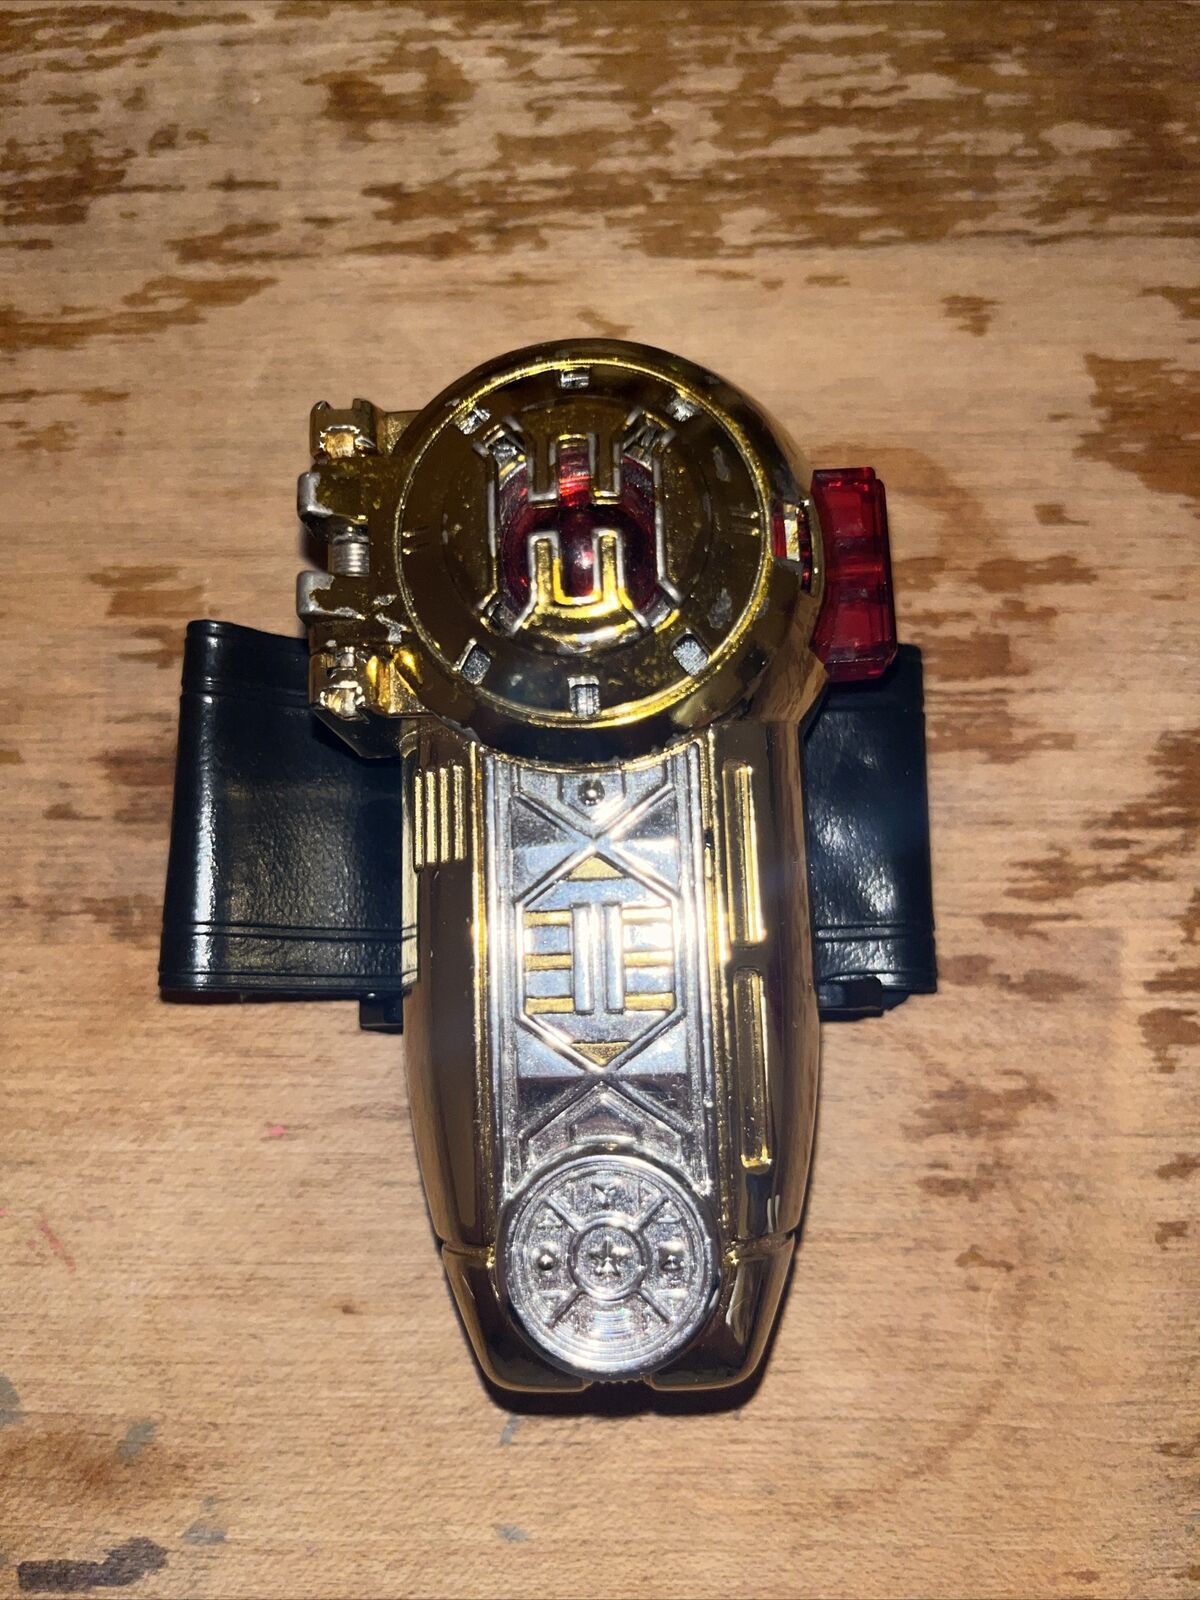 Bandai 1996 Power Rangers Zeo Gold Zeonizer Morpher Tested & Working 90s Vintage